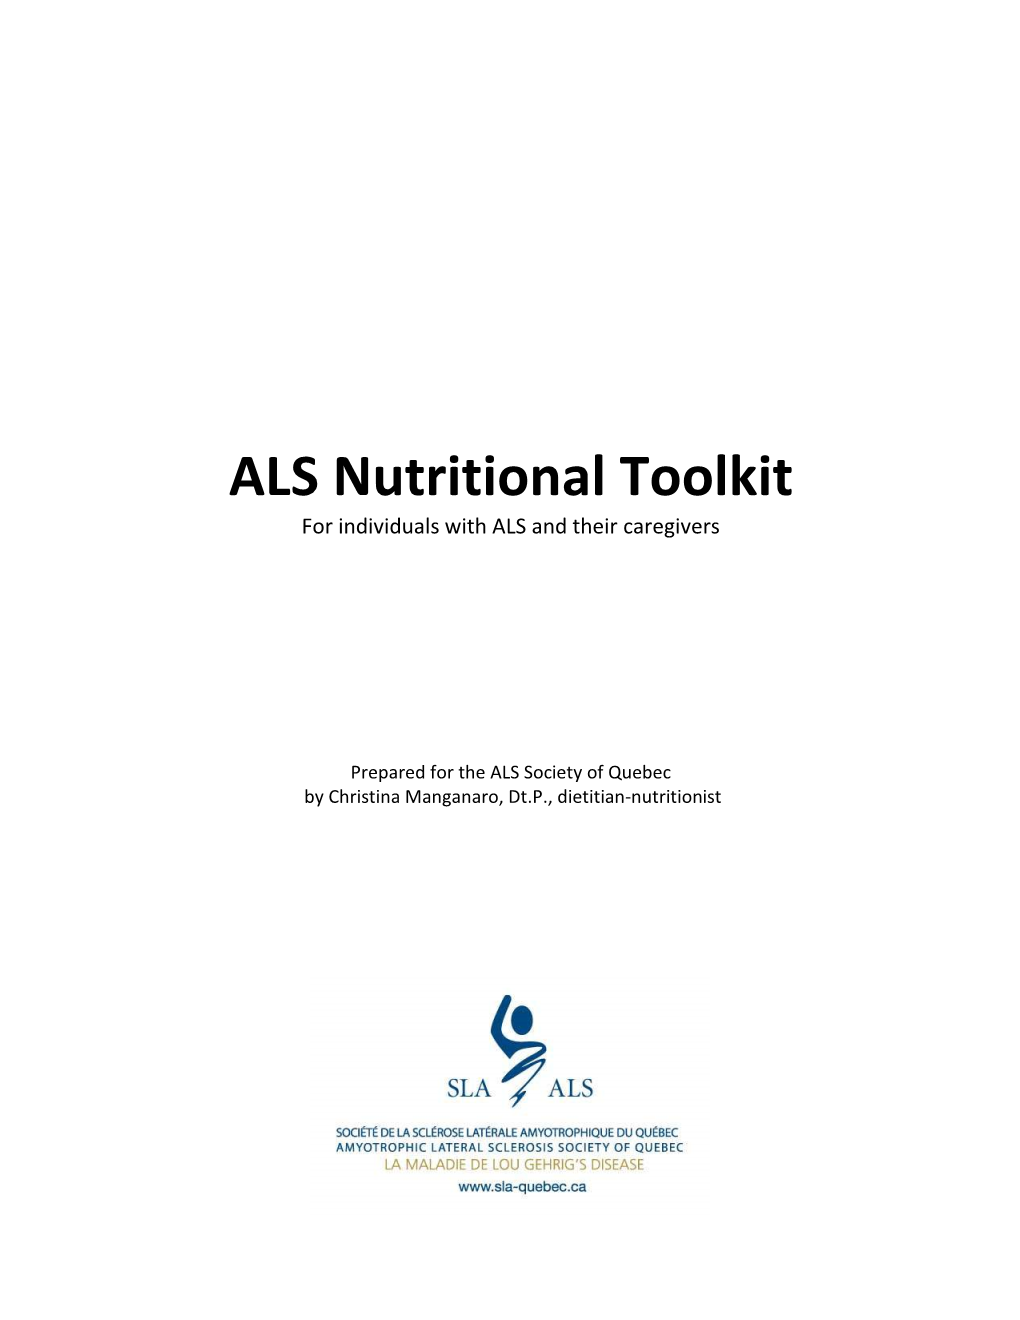 ALS Nutritional Toolkit for Individuals with ALS and Their Caregivers